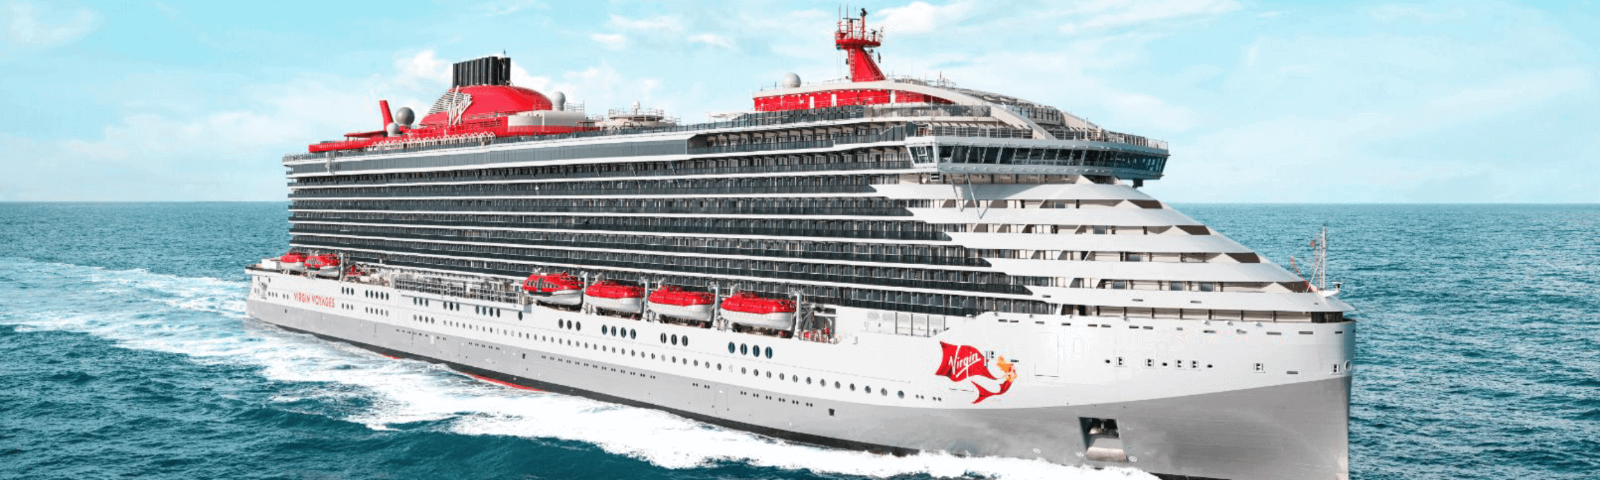 virgin voyages travel agent contact